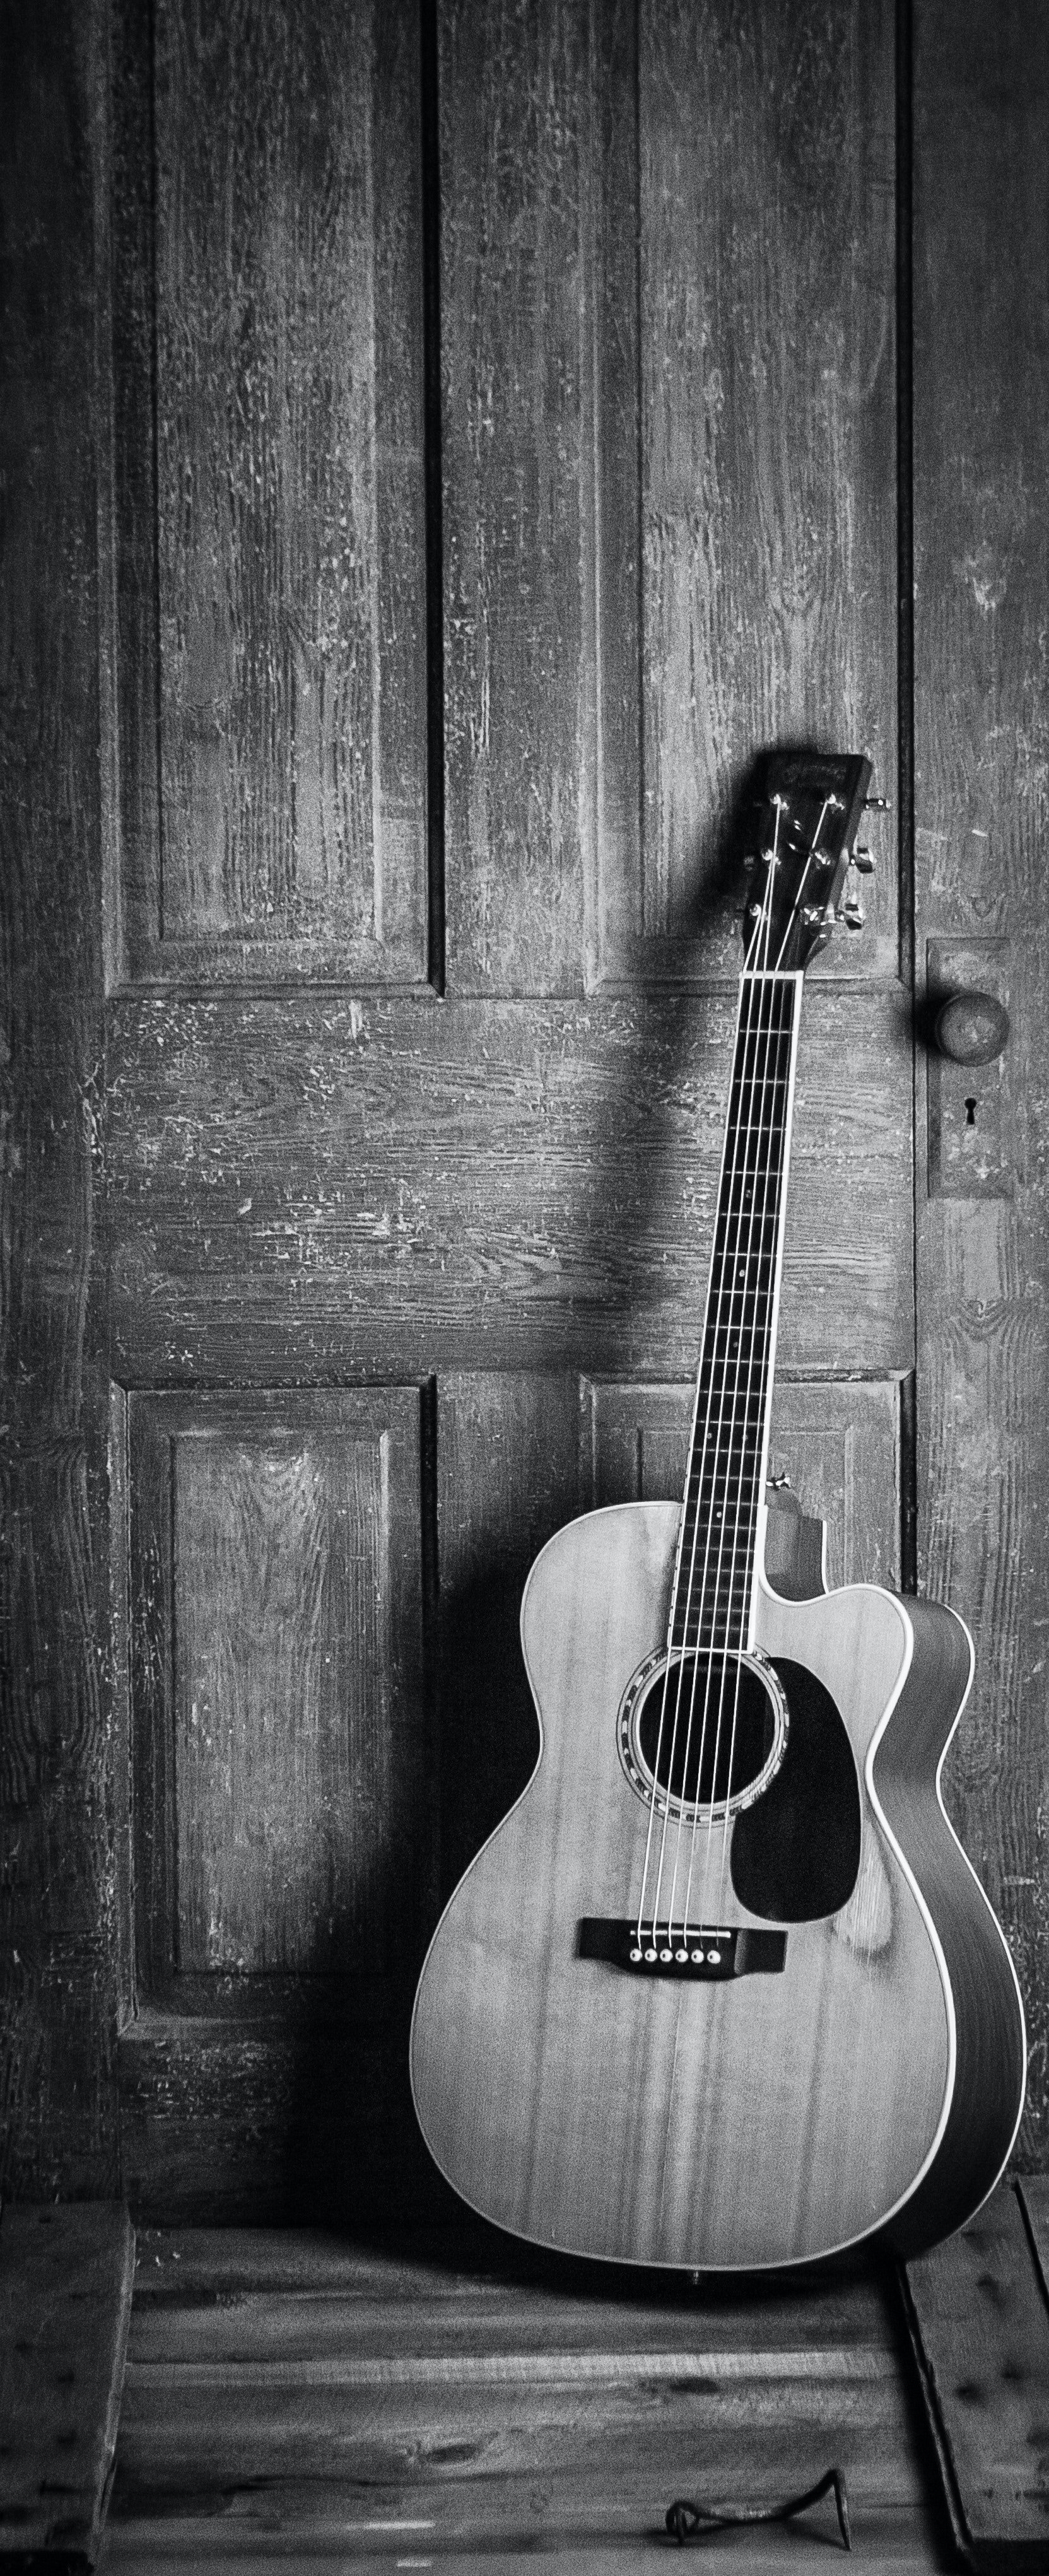 Balck and white photo of a guitar leaning against a wall. | Source: Pexels/  Jessica Lewis